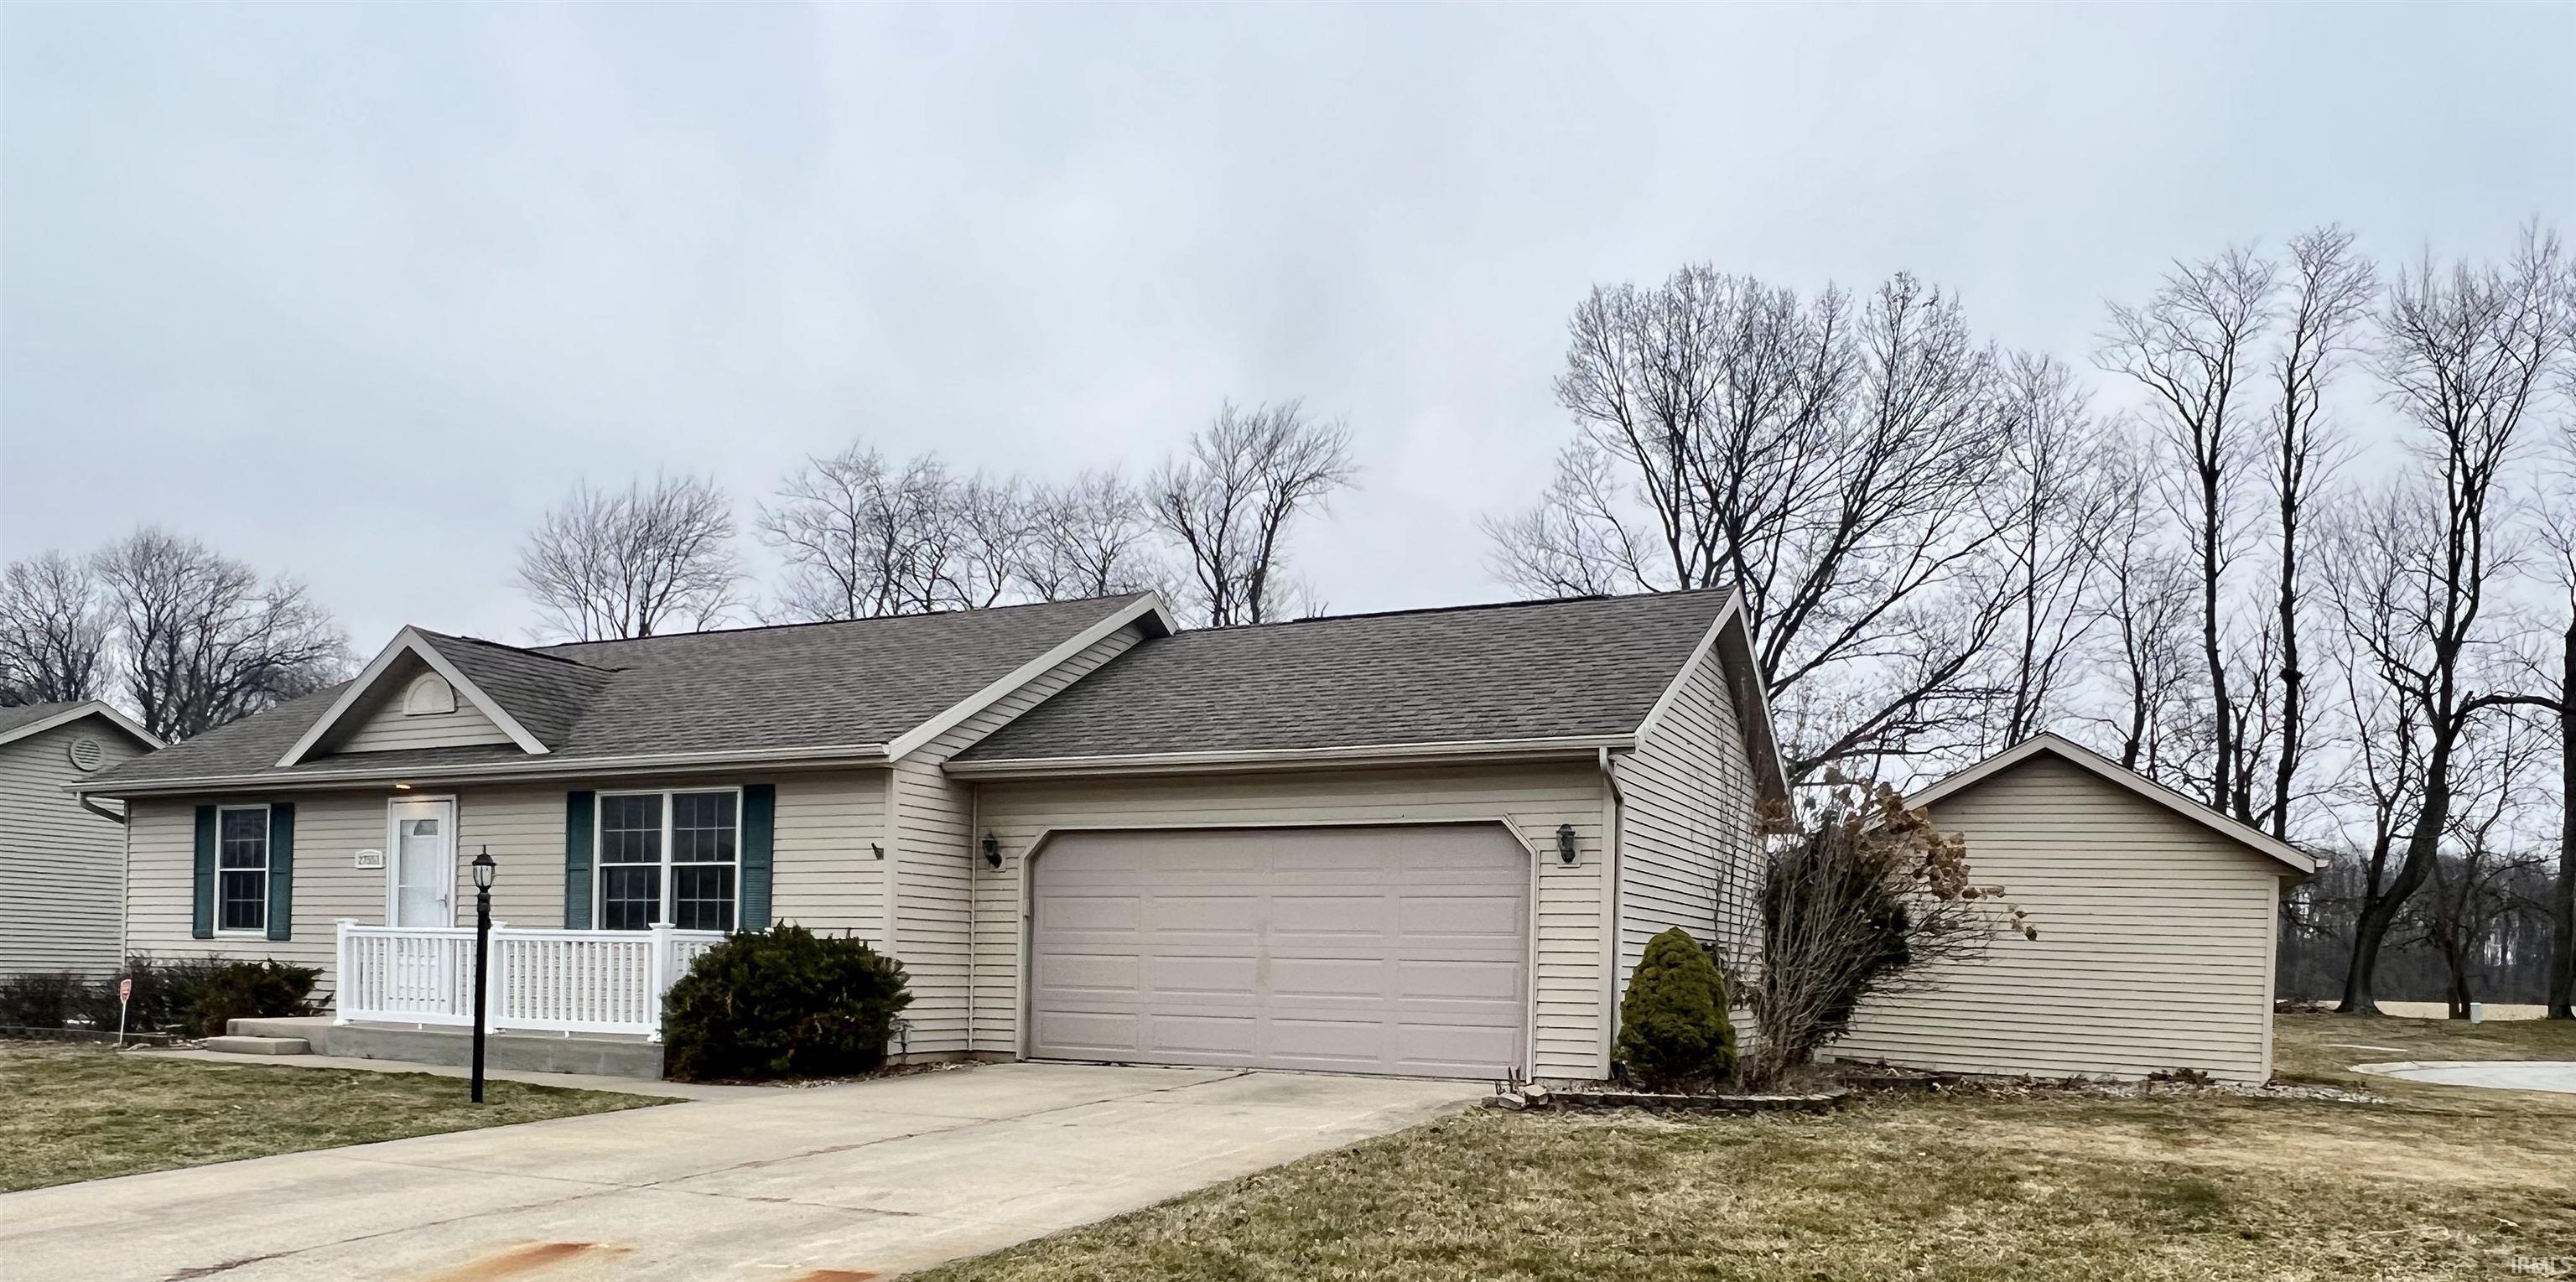 27551 Whitetail Way, Elkhart, IN 46514